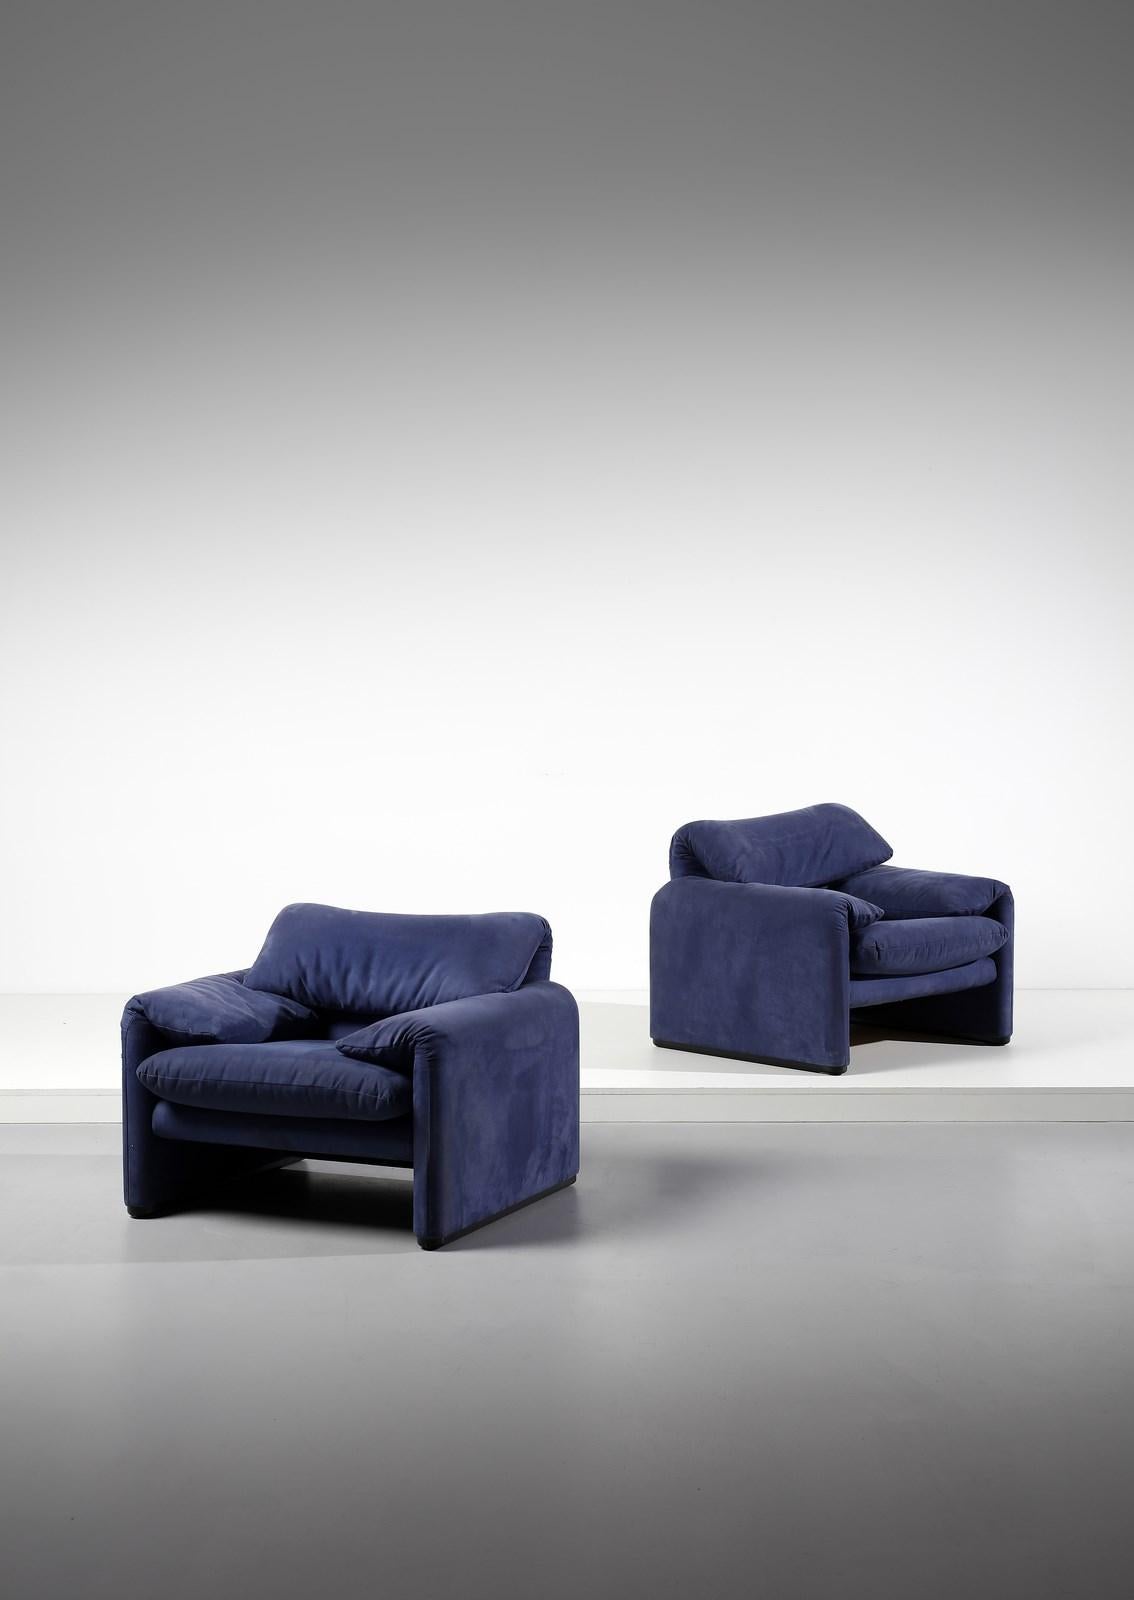 Mid-20th Century Pair Maralunga Armachairs by Vico Magistretti from Cassina